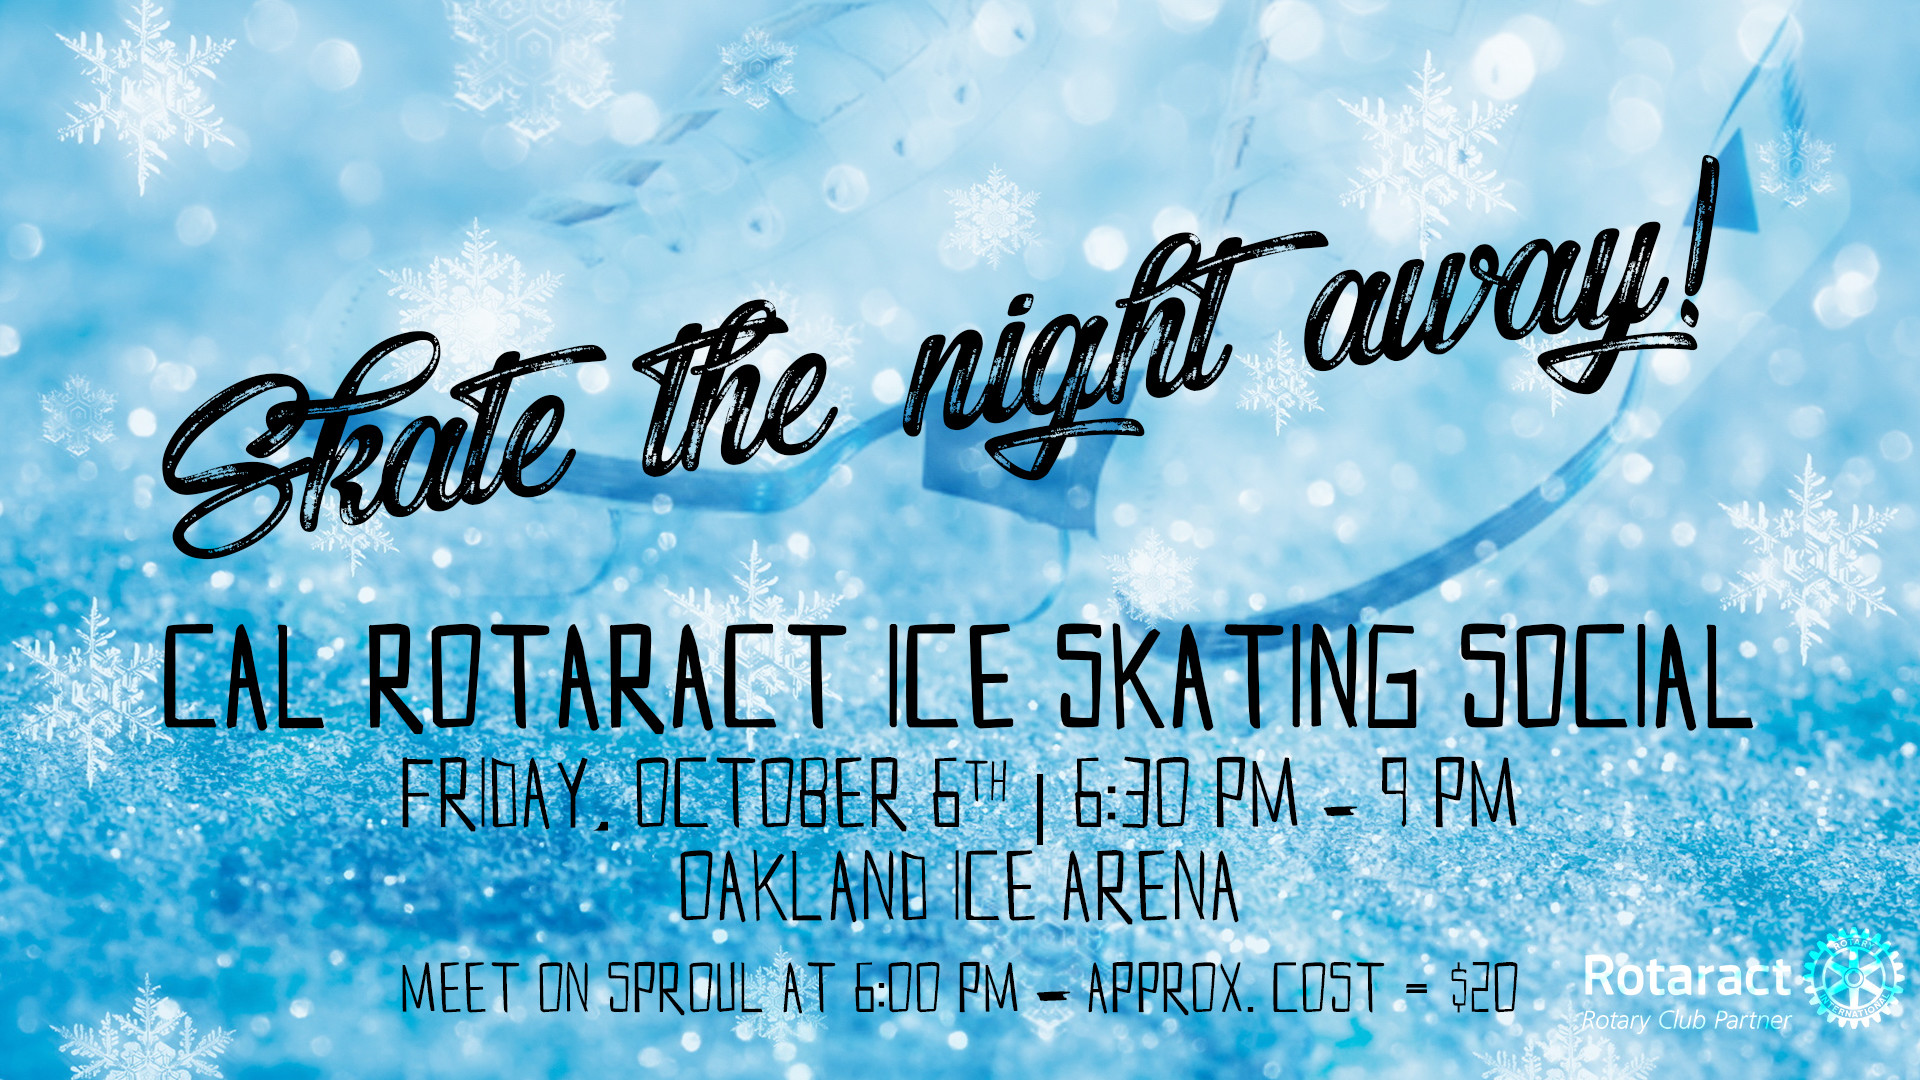 1920x1080 Well skate away that stress with Cal Rotaract and take a break from those  books!